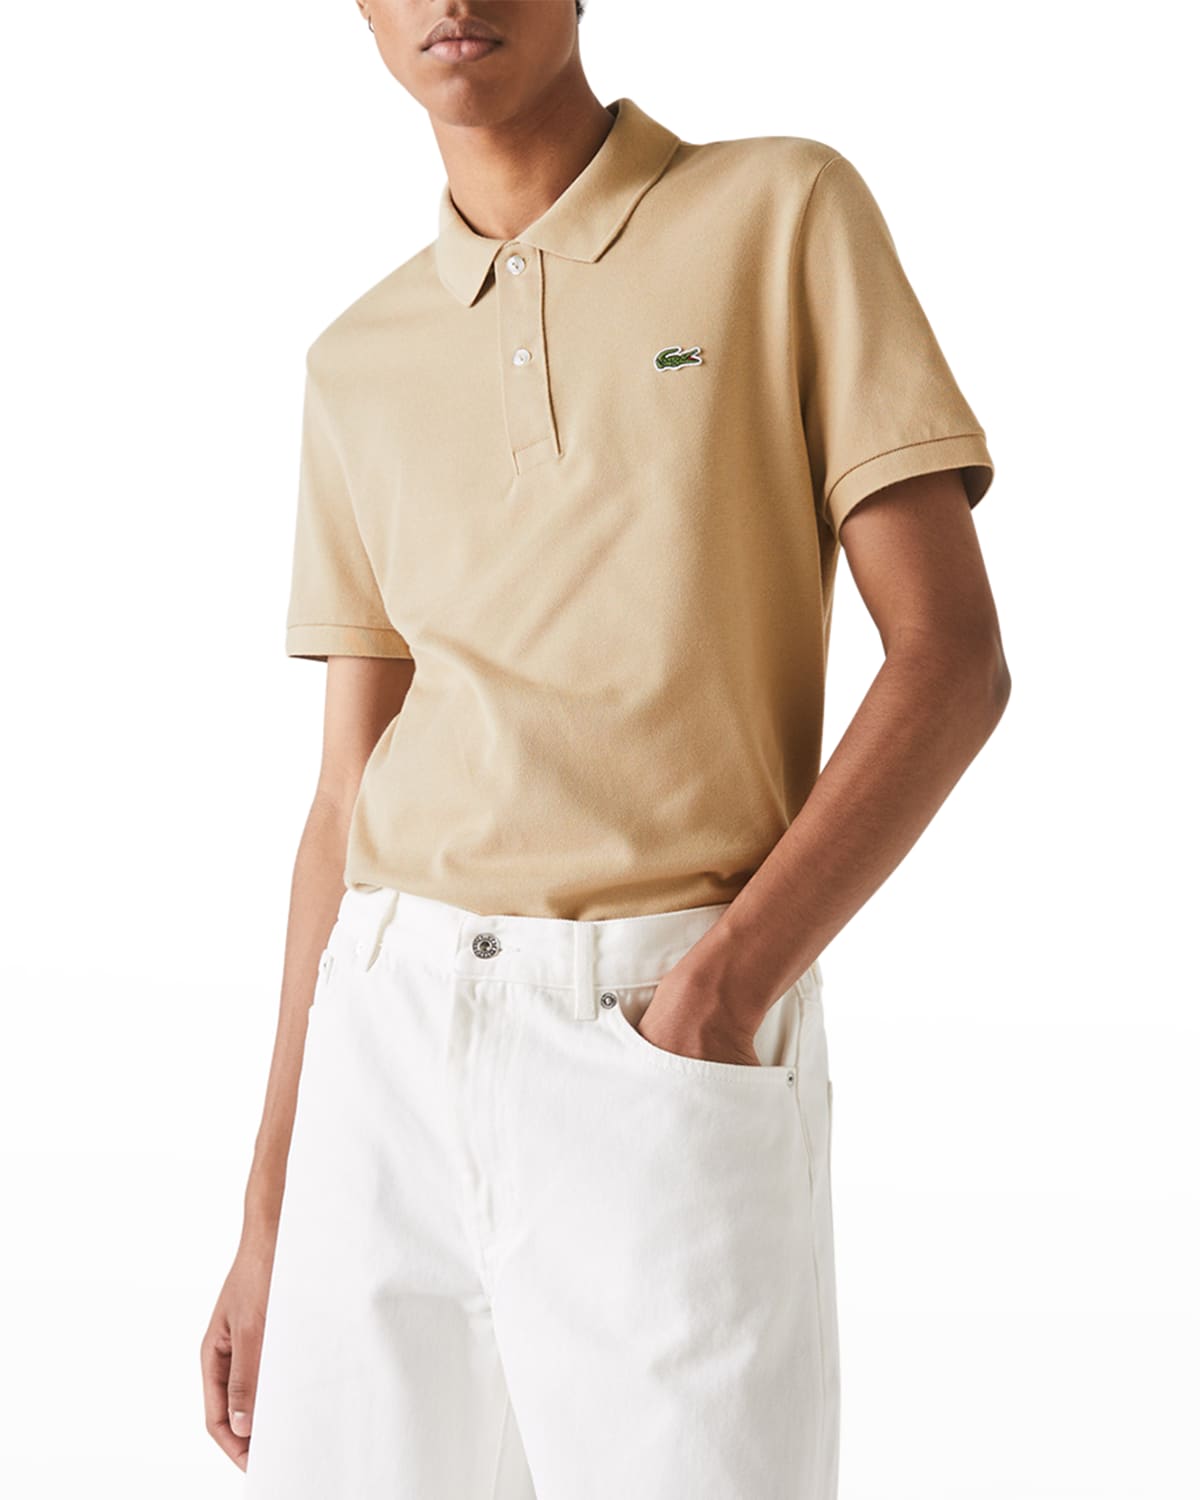 Lacoste Men's Signature Polo Shirt In Viennese